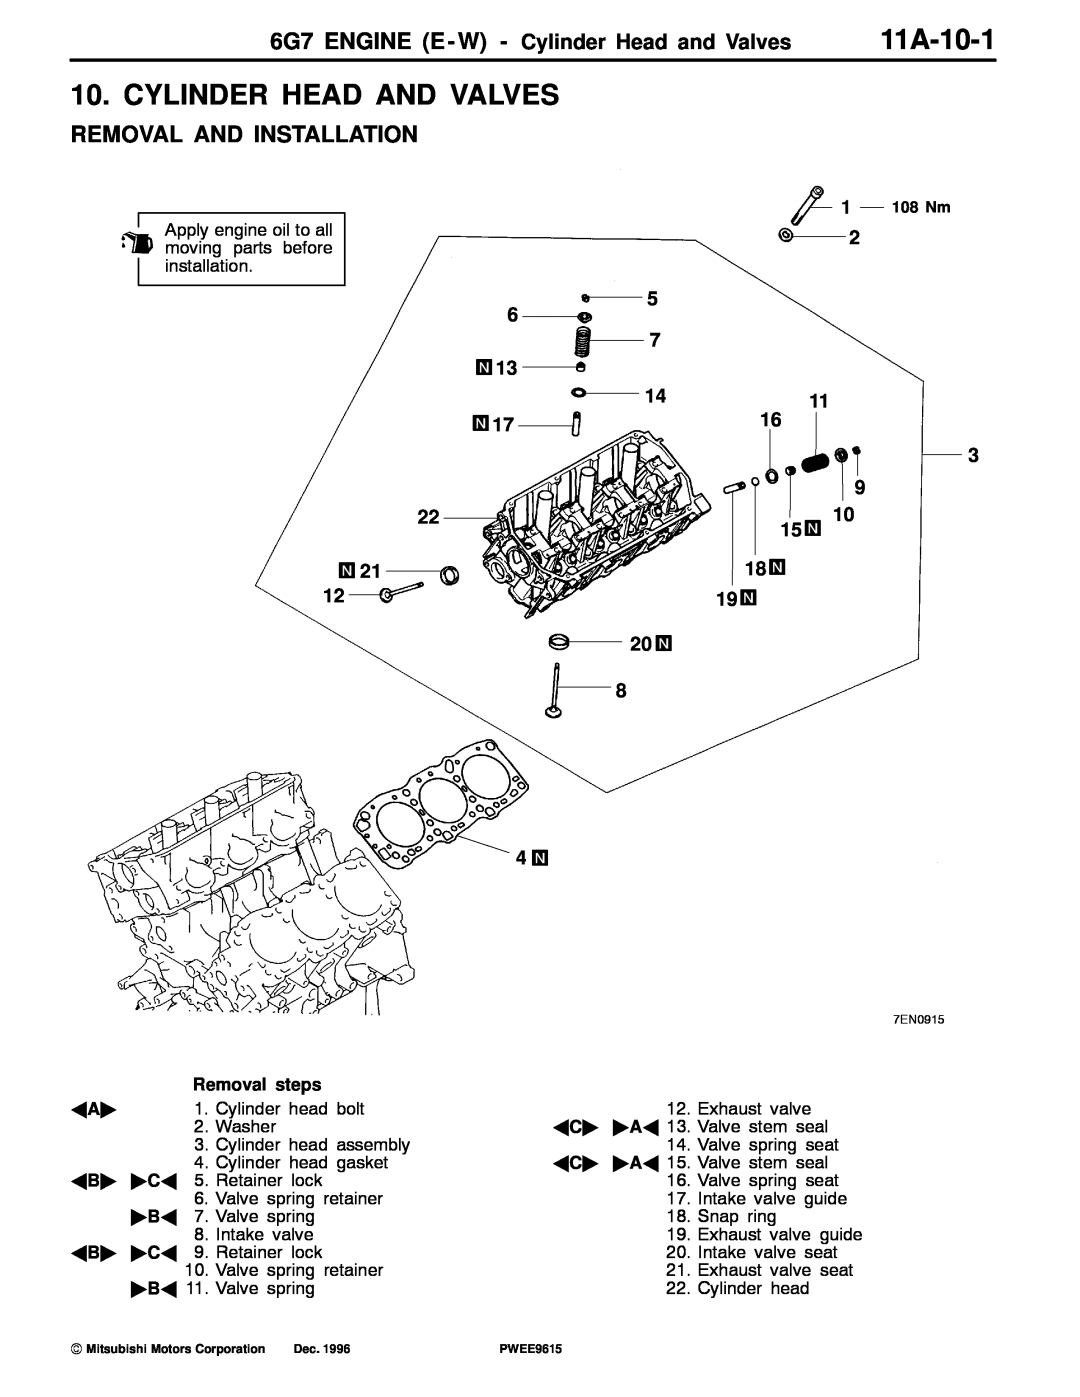 Mitsubishi Cylinder Head And Valves, 11A-10-1, 6G7 ENGINE E - W - Cylinder Head and Valves, 17 22 21, Removal steps 